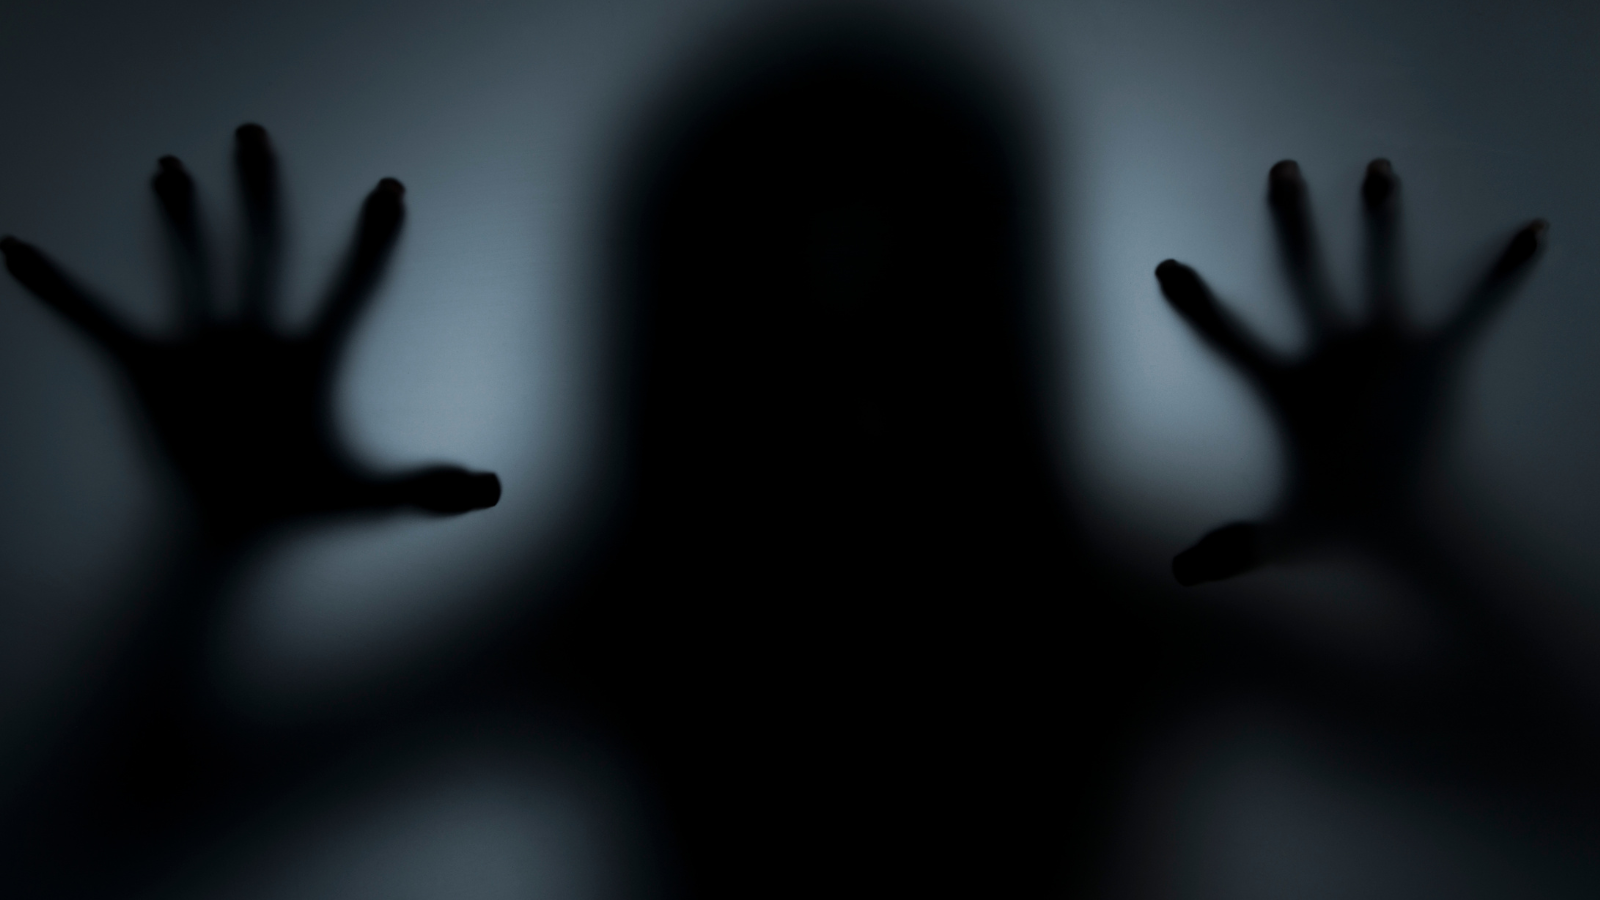 7 Sales Strategy Tips from Horror Films